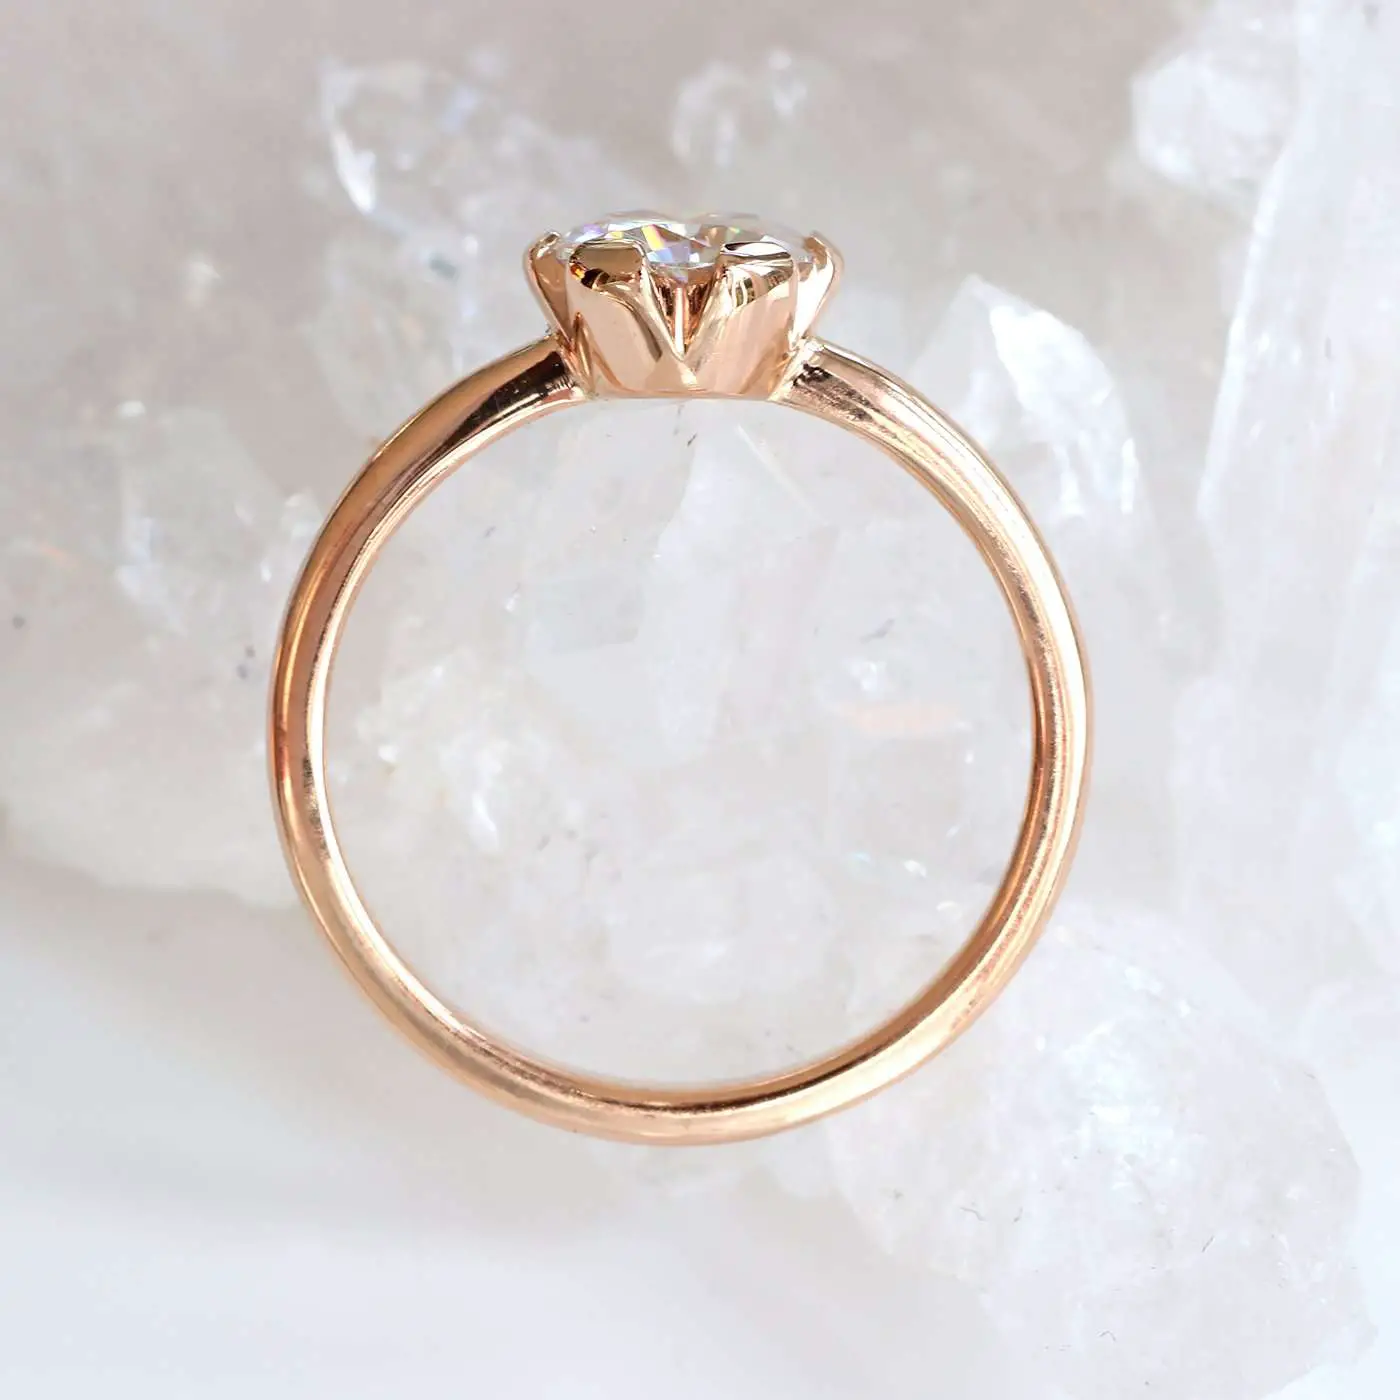 Moissanite Engagement Ring in 18ct Rose Gold, Size M 1/2 ...